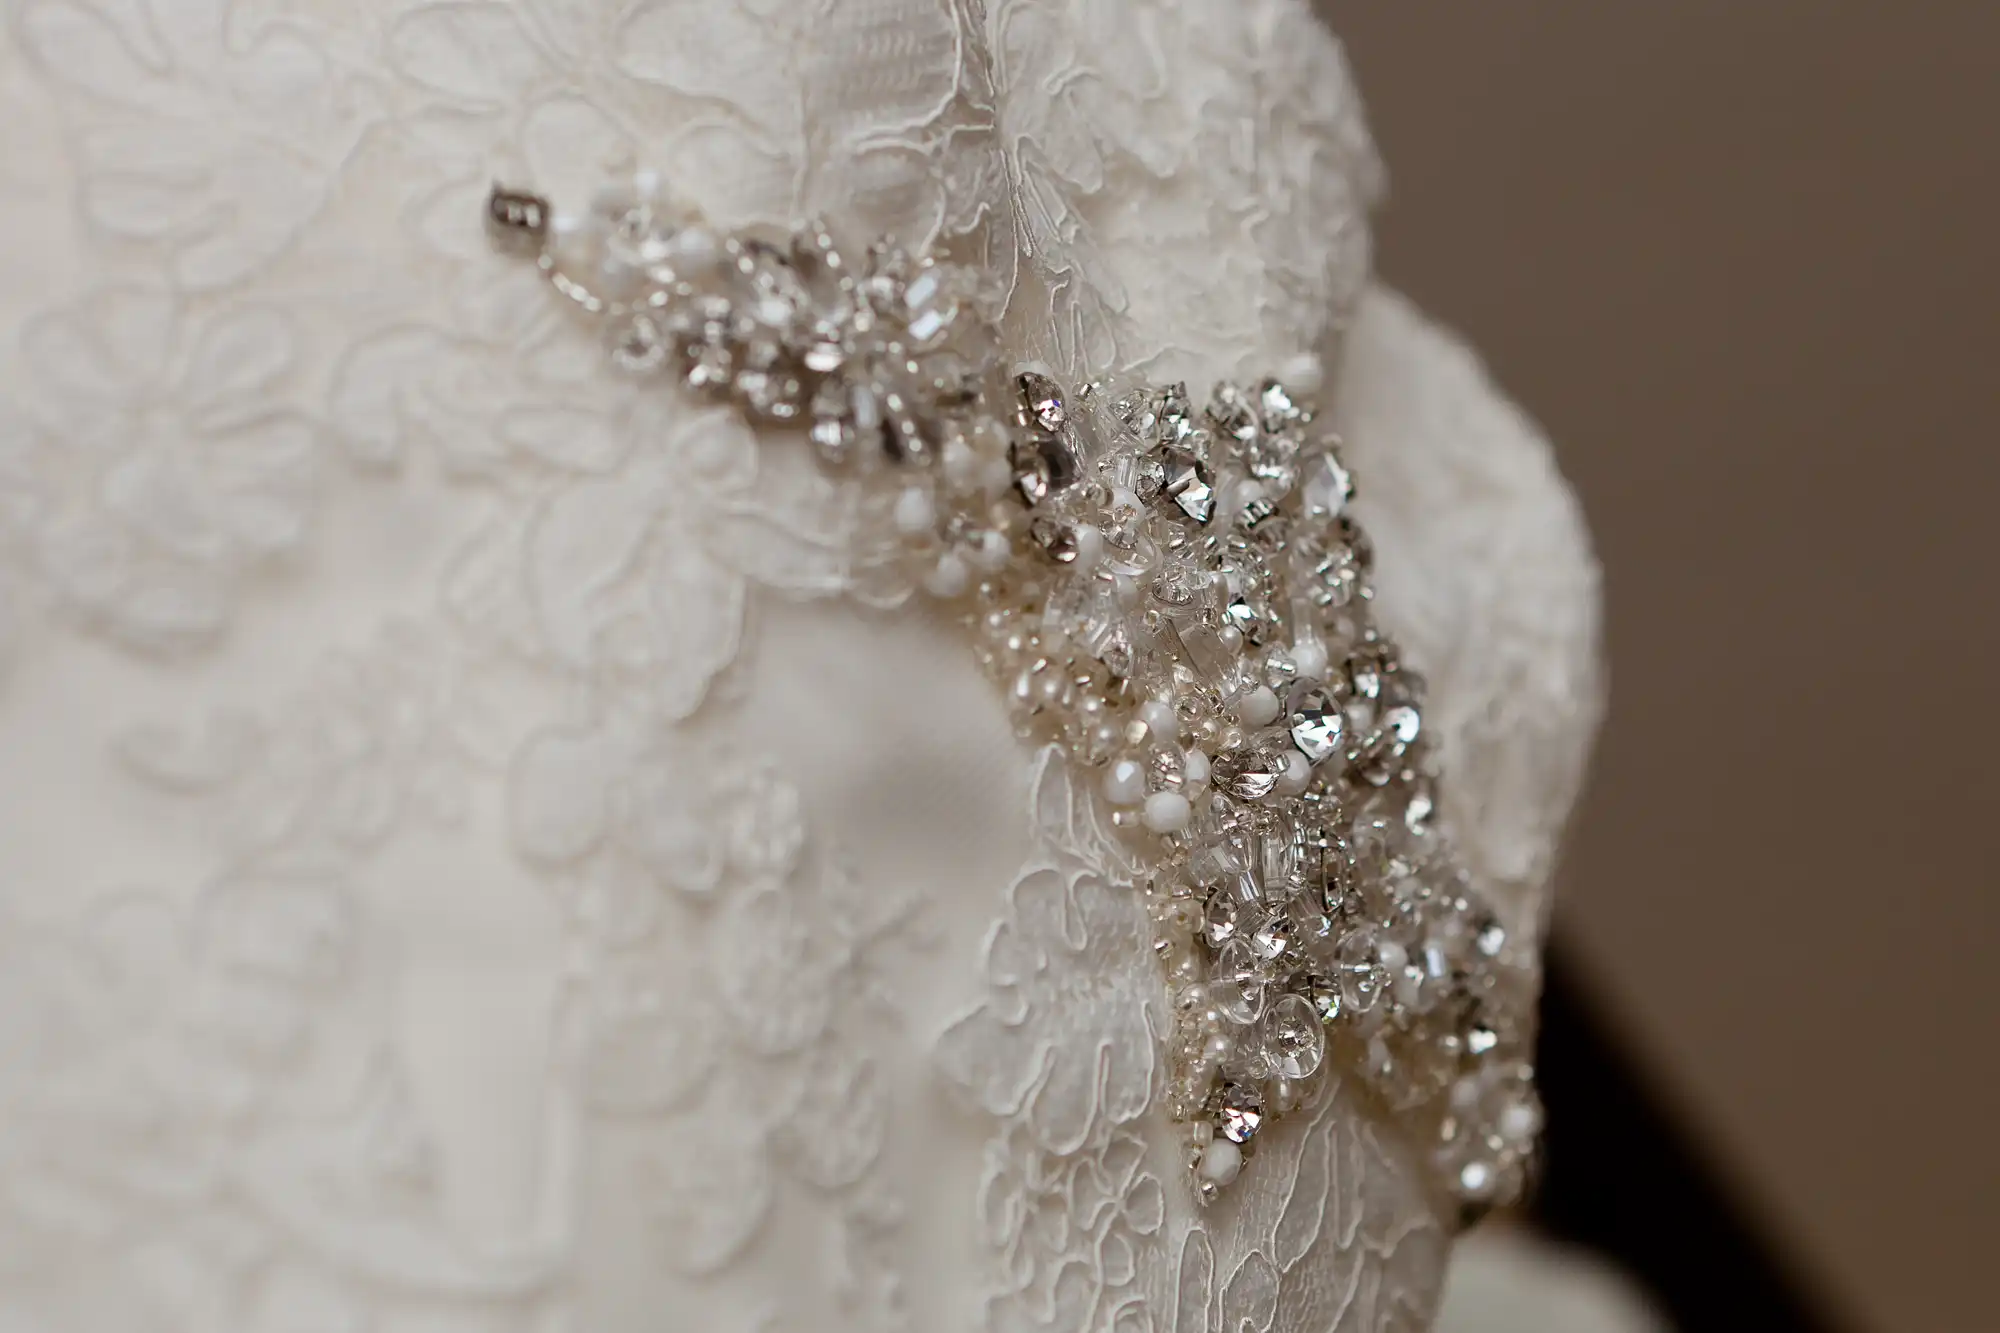 Close-up of a detailed wedding dress with lace fabric and intricate beading on the sleeve.